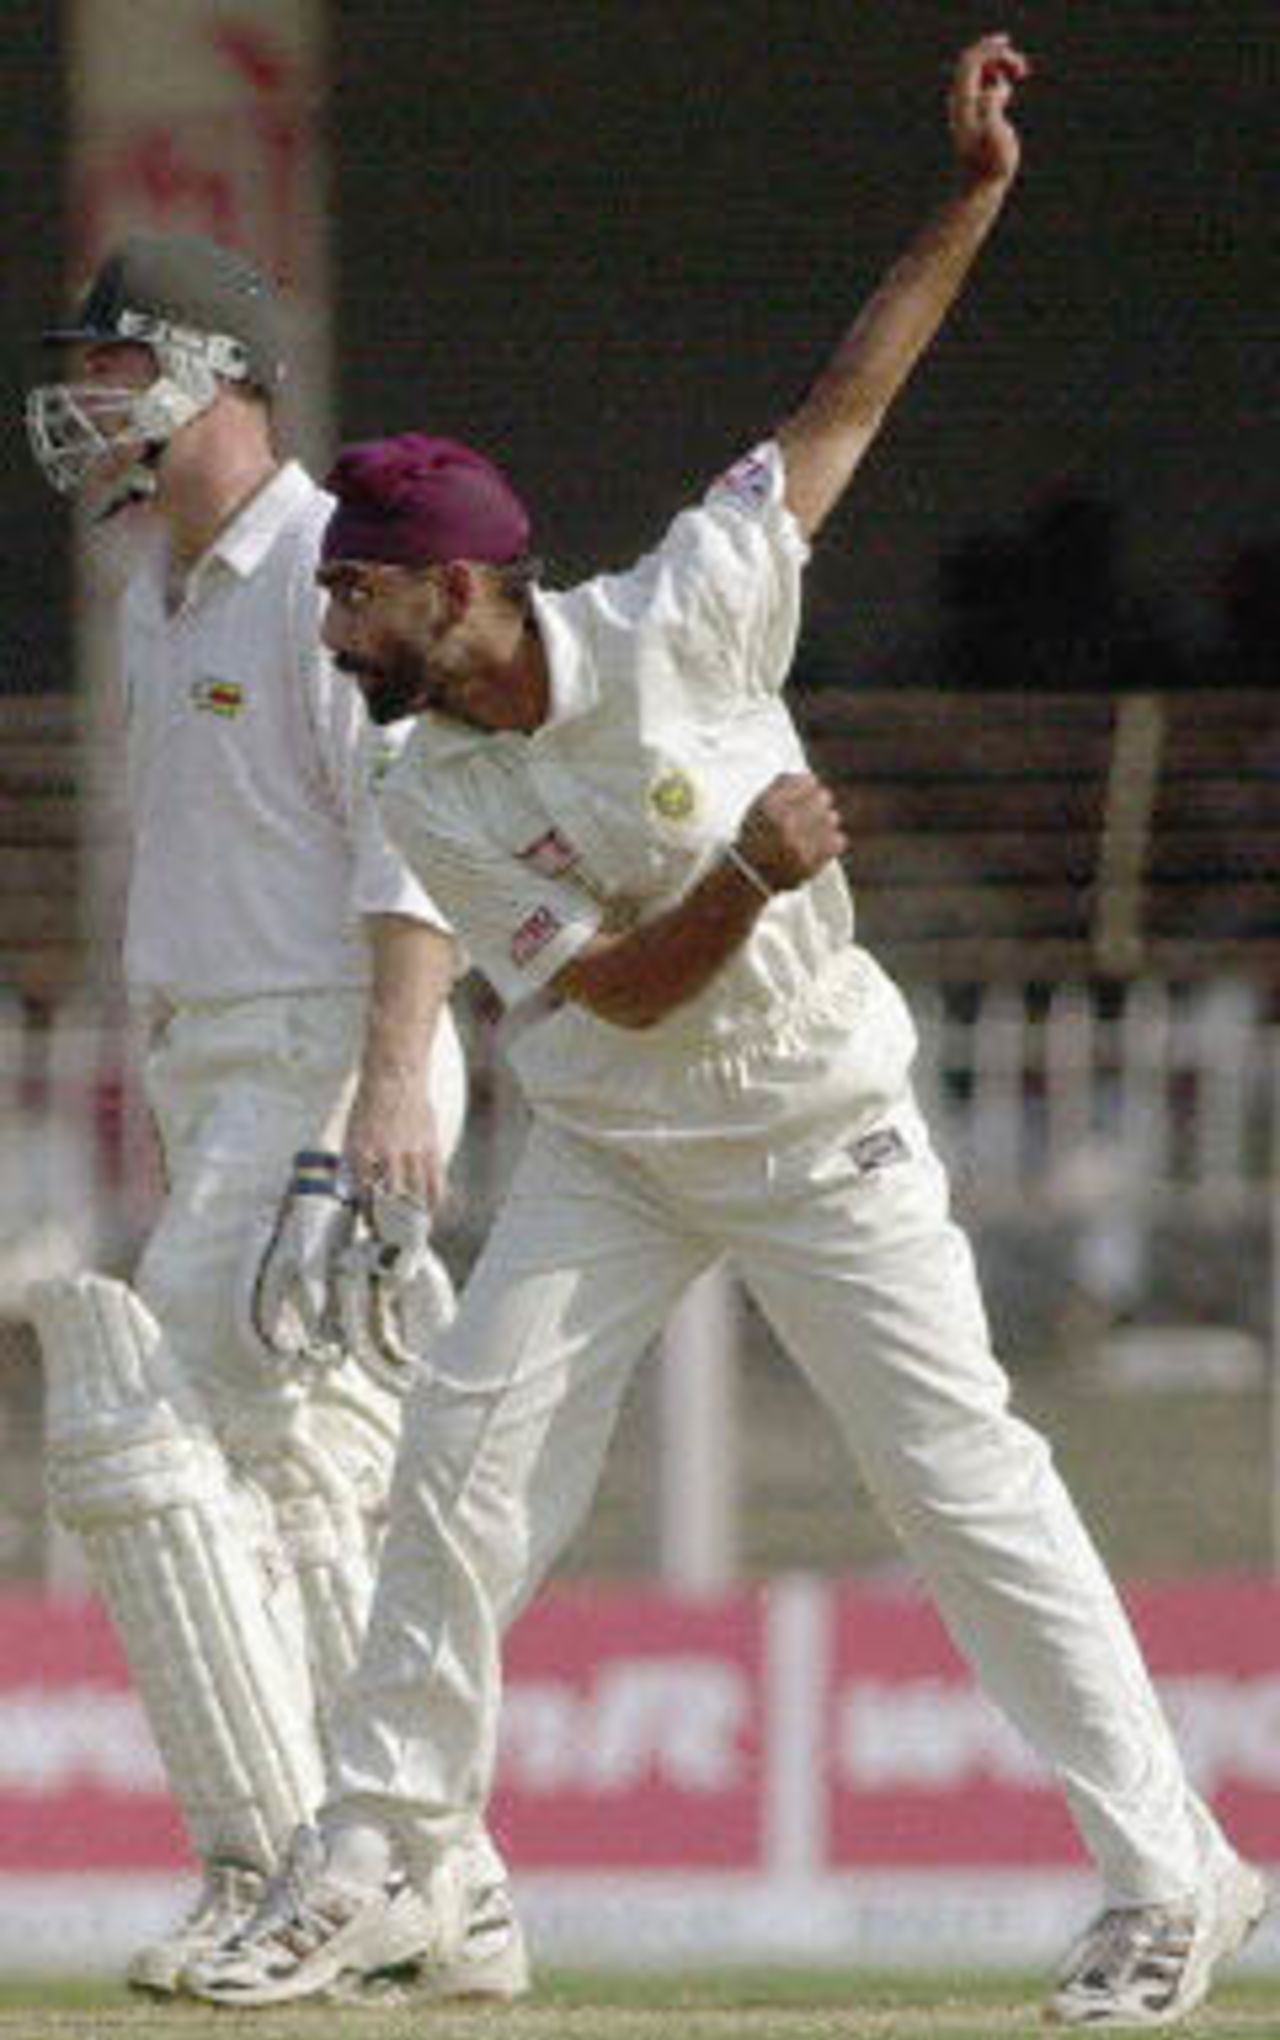 Debutant Sharandeep Singh bowls a delivery to Andy Flower as Campbell watches, Zimbabwe in India, 2000/01, 2nd Test, India v Zimbabwe, Vidarbha C.A. Ground, Nagpur, 25-29 November 2000 (Day 4).